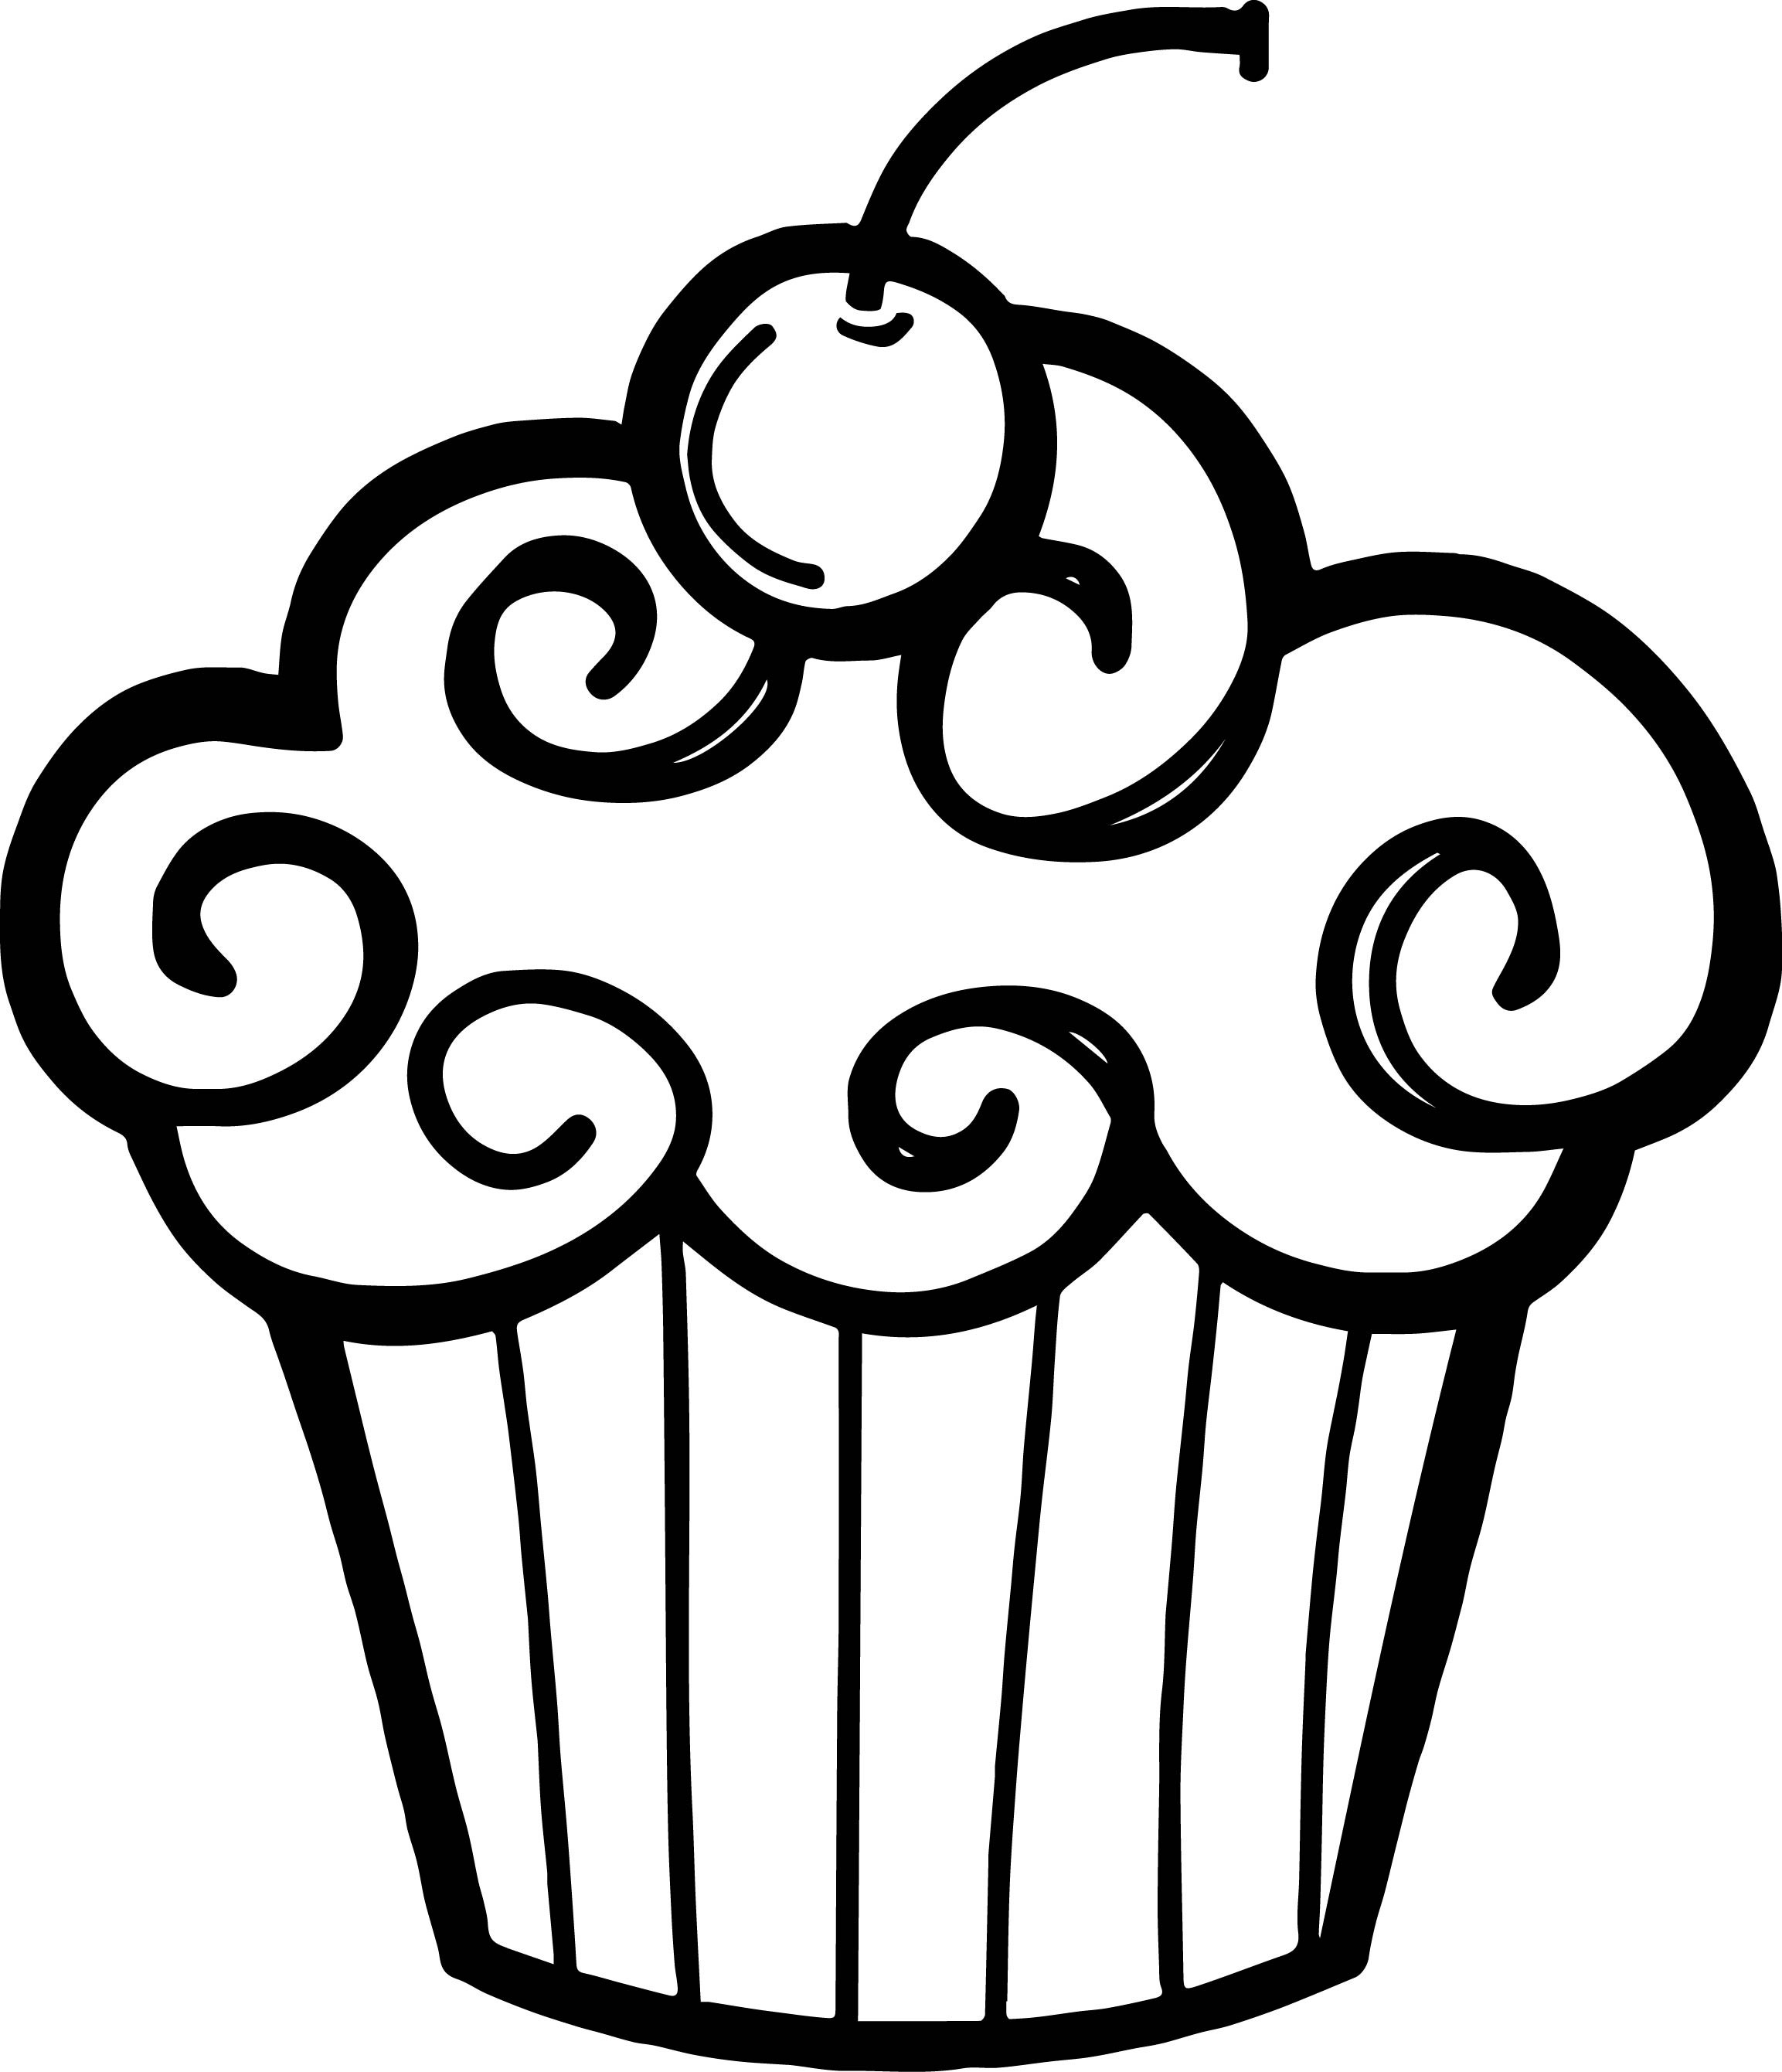 Black and white cake clipart 5 » Clipart Station.